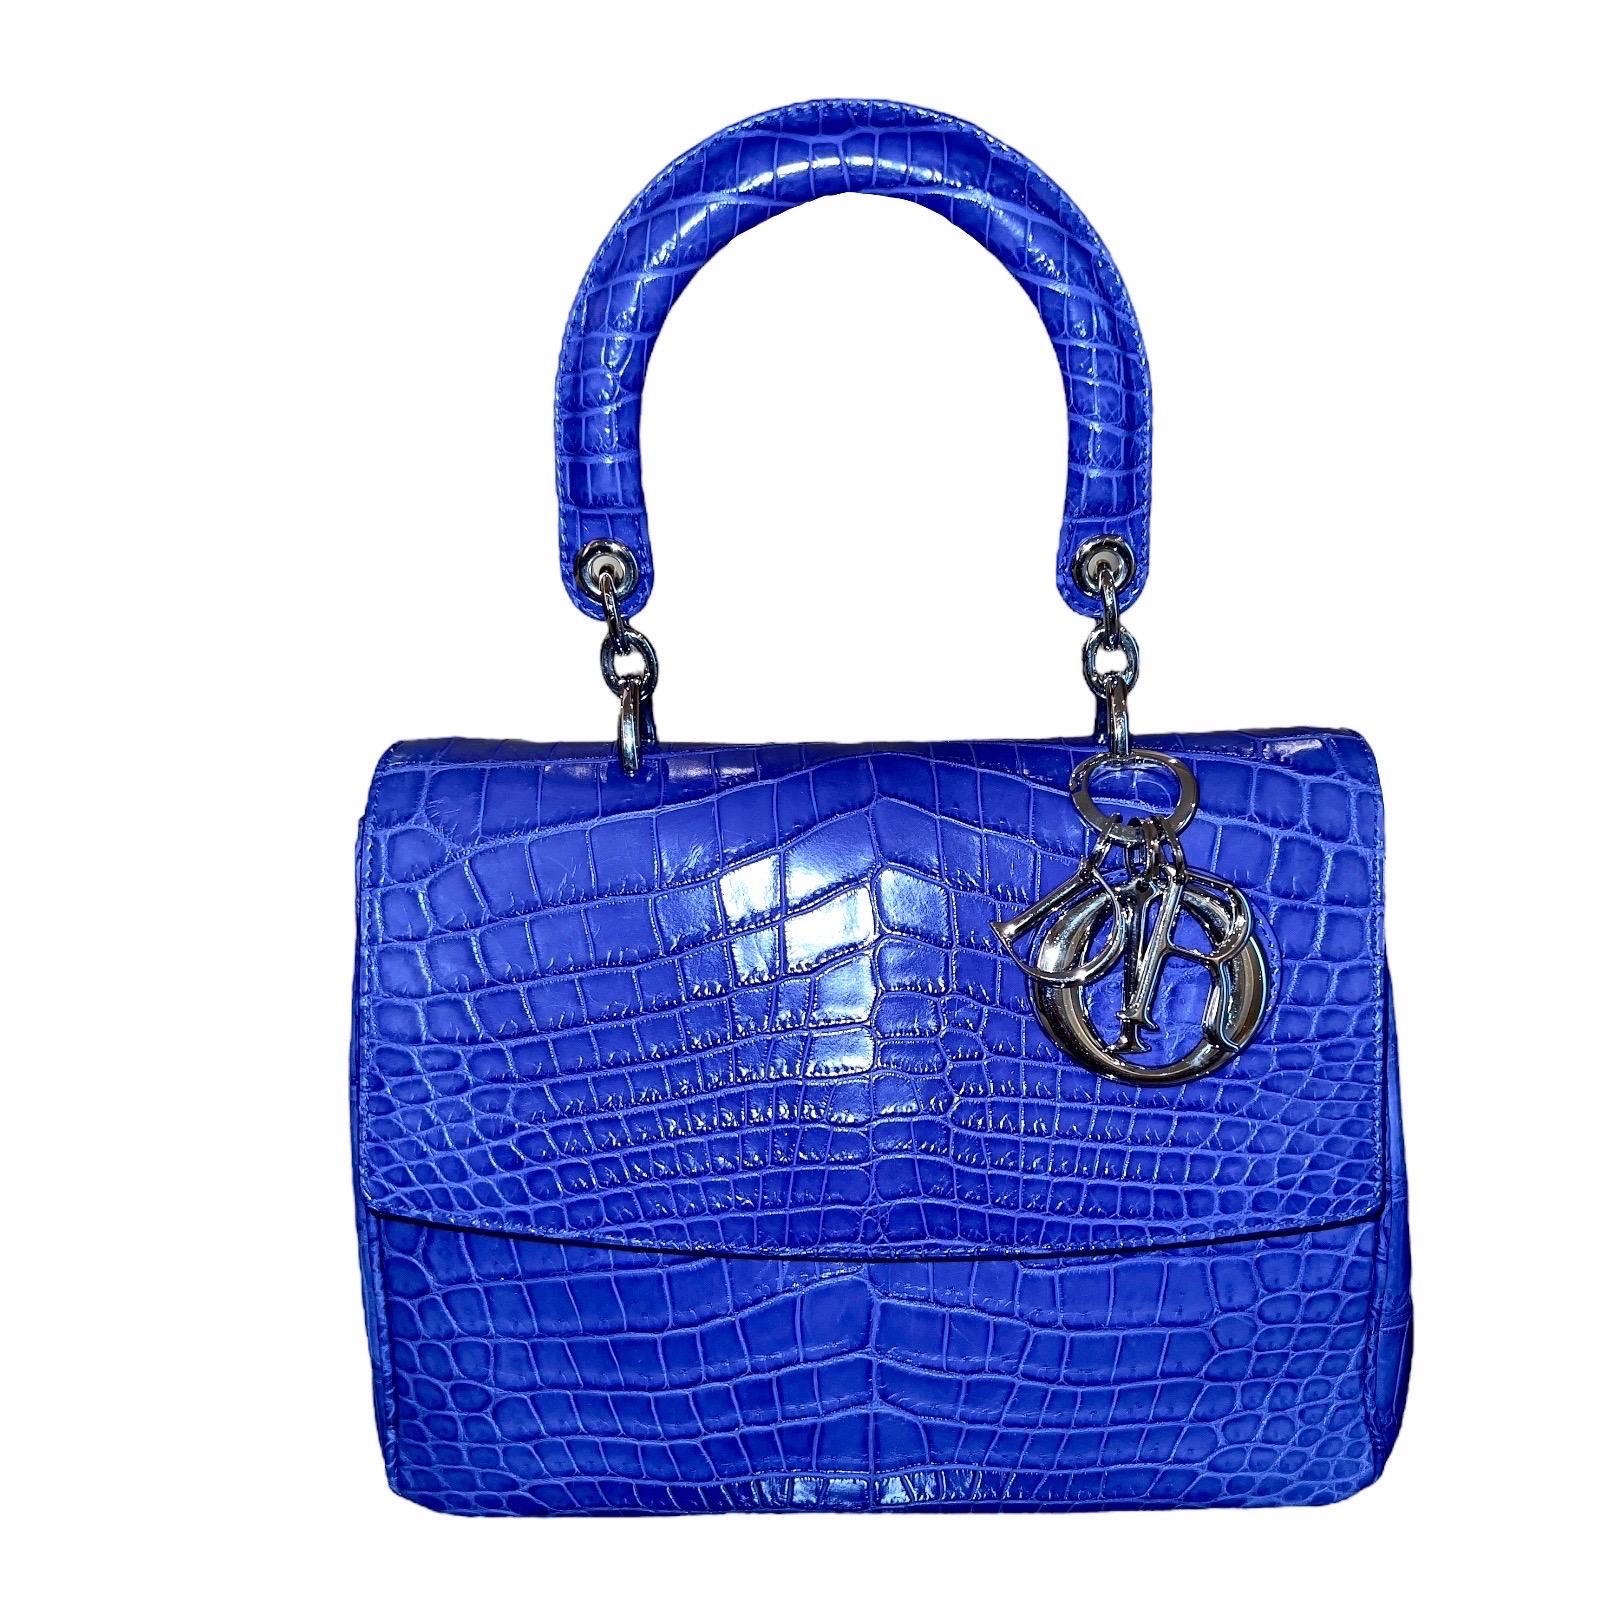 Absolutely rare Christian Dior Lady Bag
Limited Edition
Fantastic blue color
Exotic skins
Large Model
Detachable shoulder strap
White-gold colored hardware
Fully lined with nappa leather
Carried by hand, cross body or handbag.
Meant to be as day,